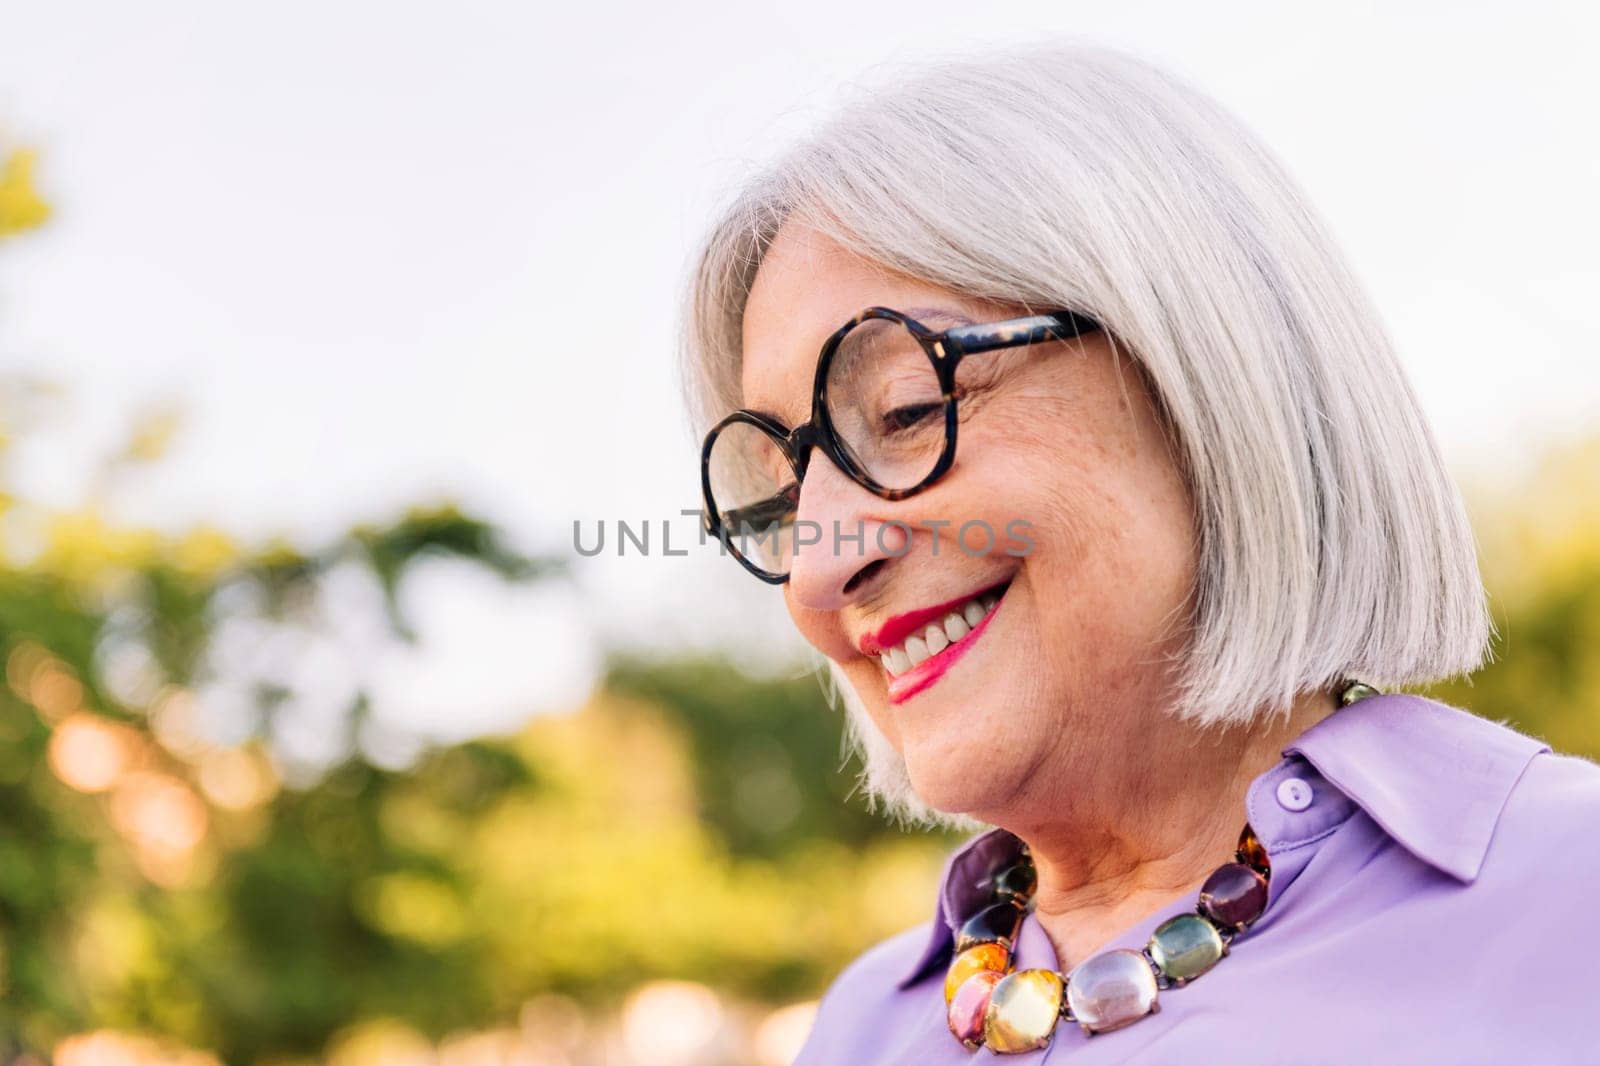 portrait of a beautiful senior woman with glasses smiling, concept of elderly people leisure and happiness in old age, copy space for text